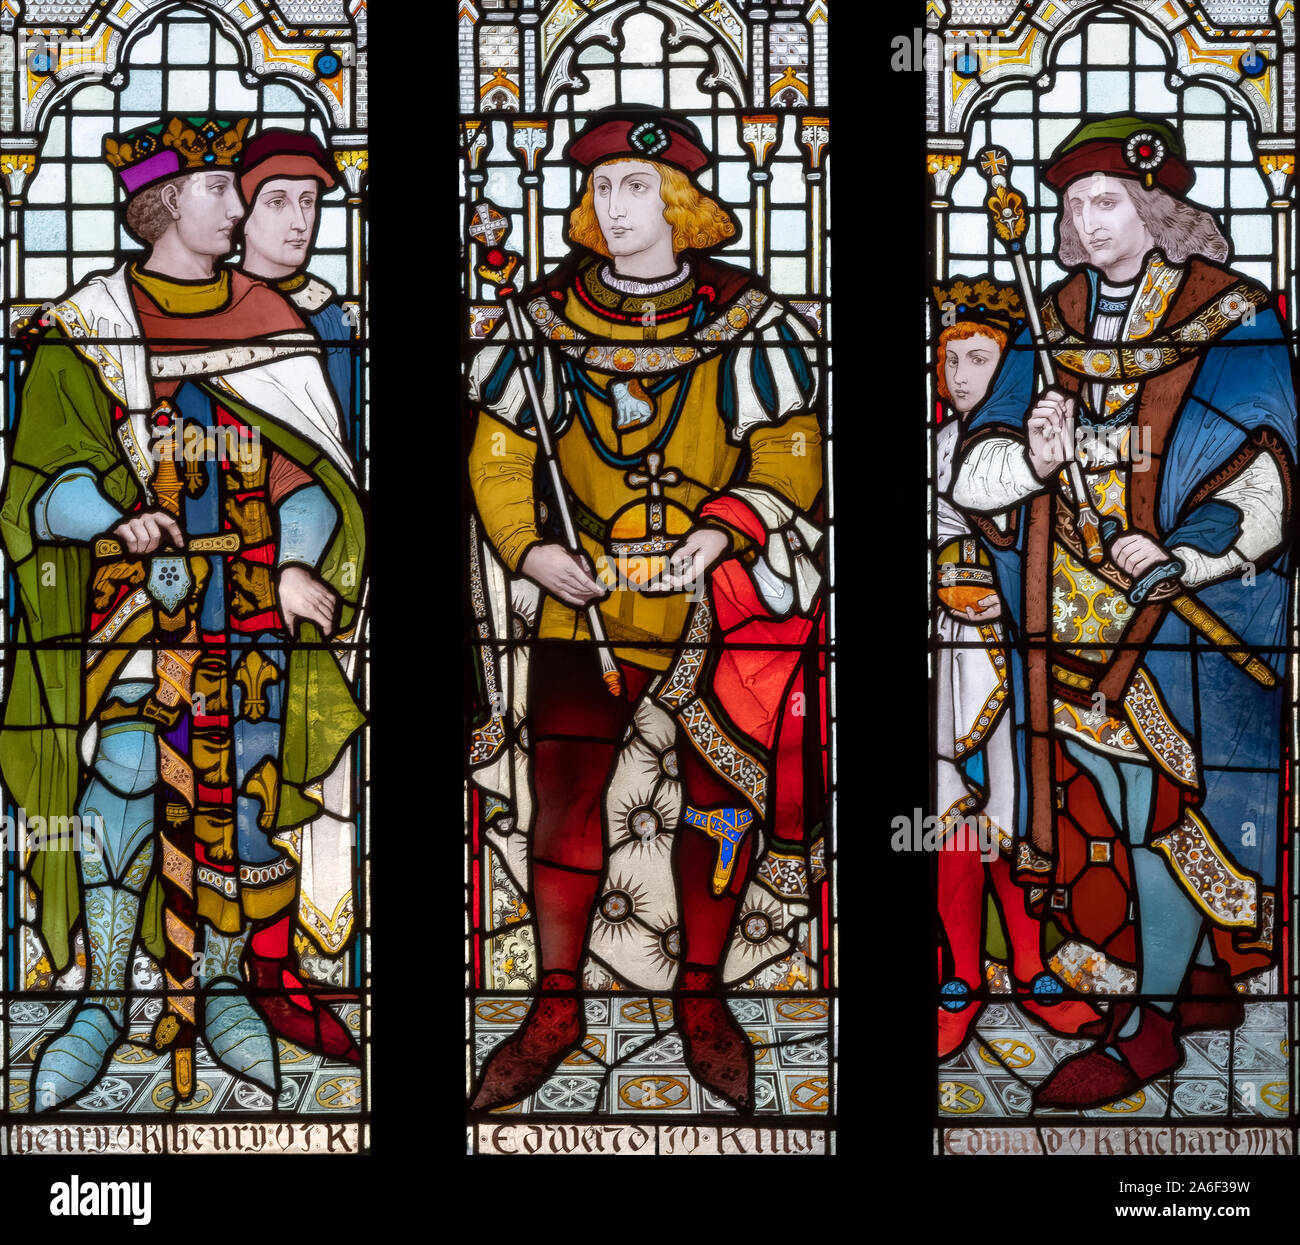 15th century English Monarchs depicted by Heaton, Butler and Bayne (1871) in the Great Hall, Rochdale Town Hall, Greater Manchester, UK Stock Photo